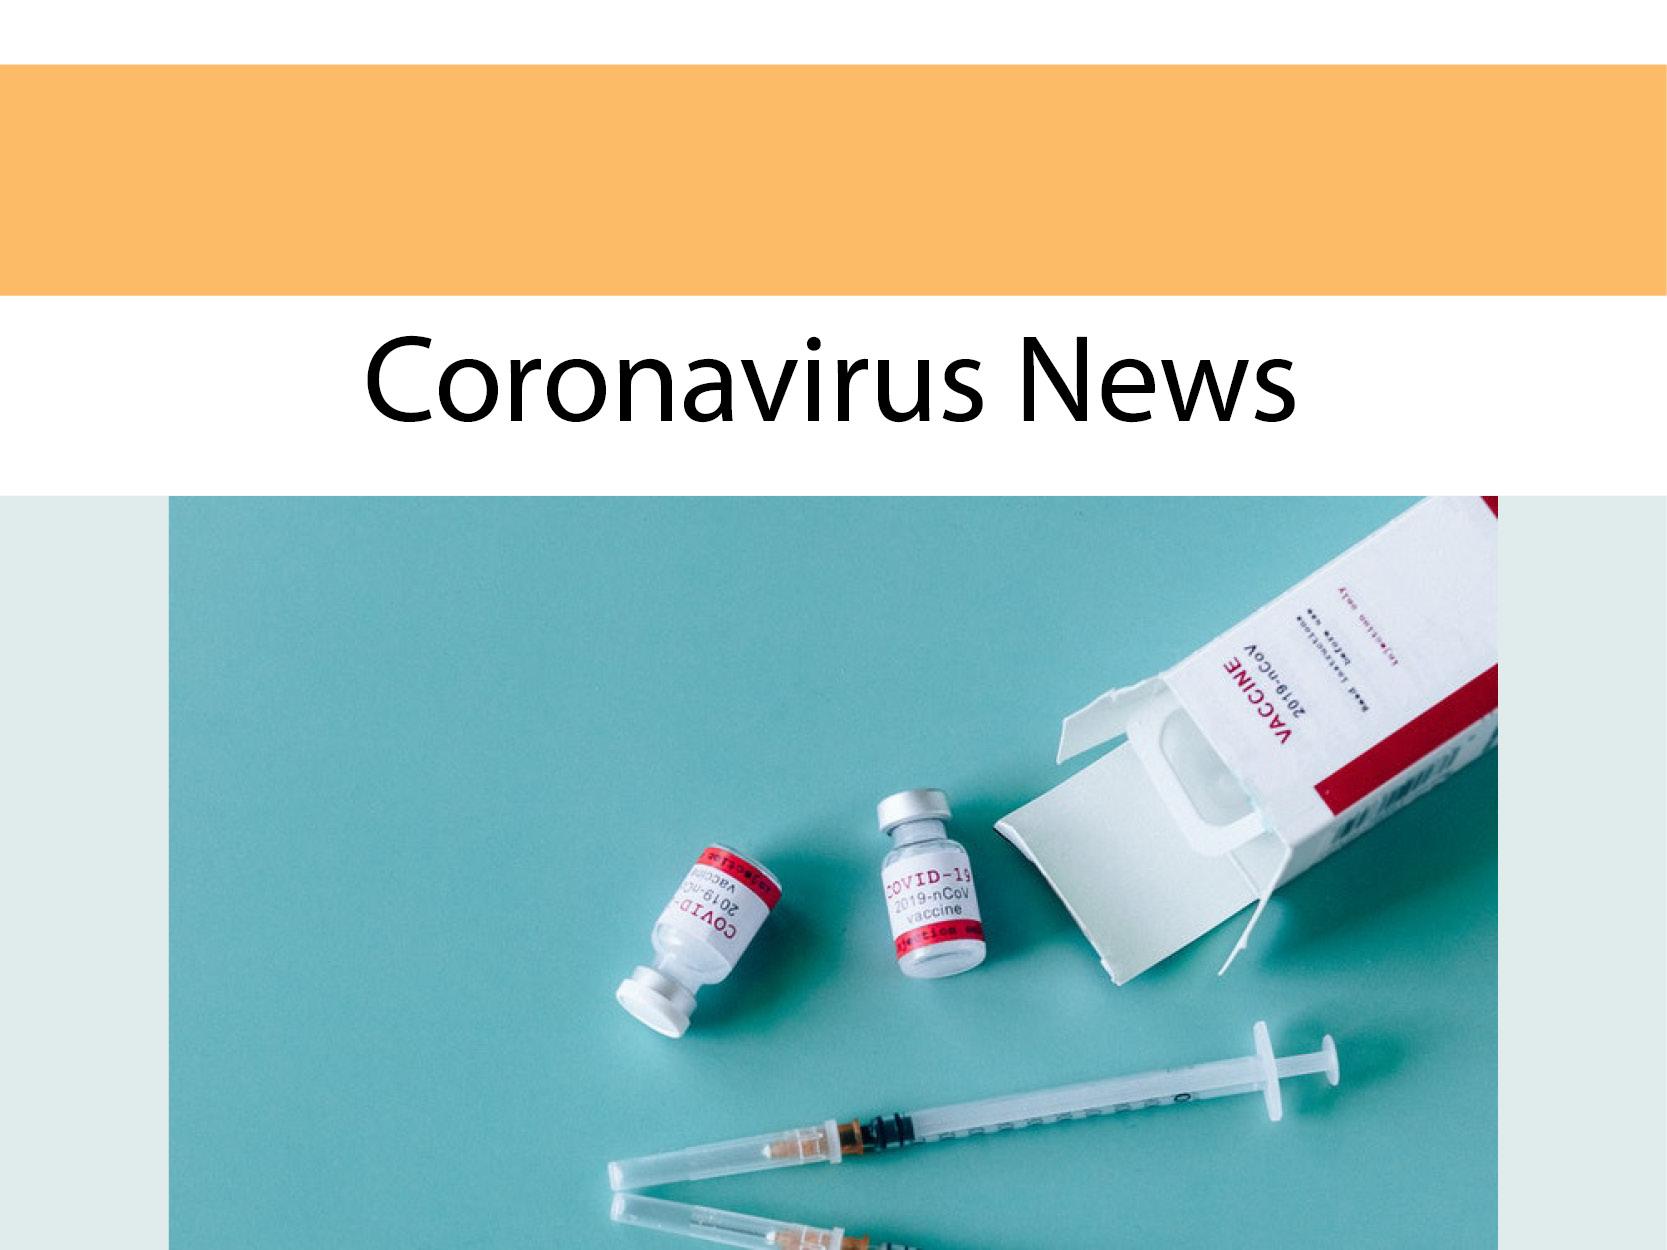 COVID-19 vaccination now available for residents of EOHU territory aged 60 and greater